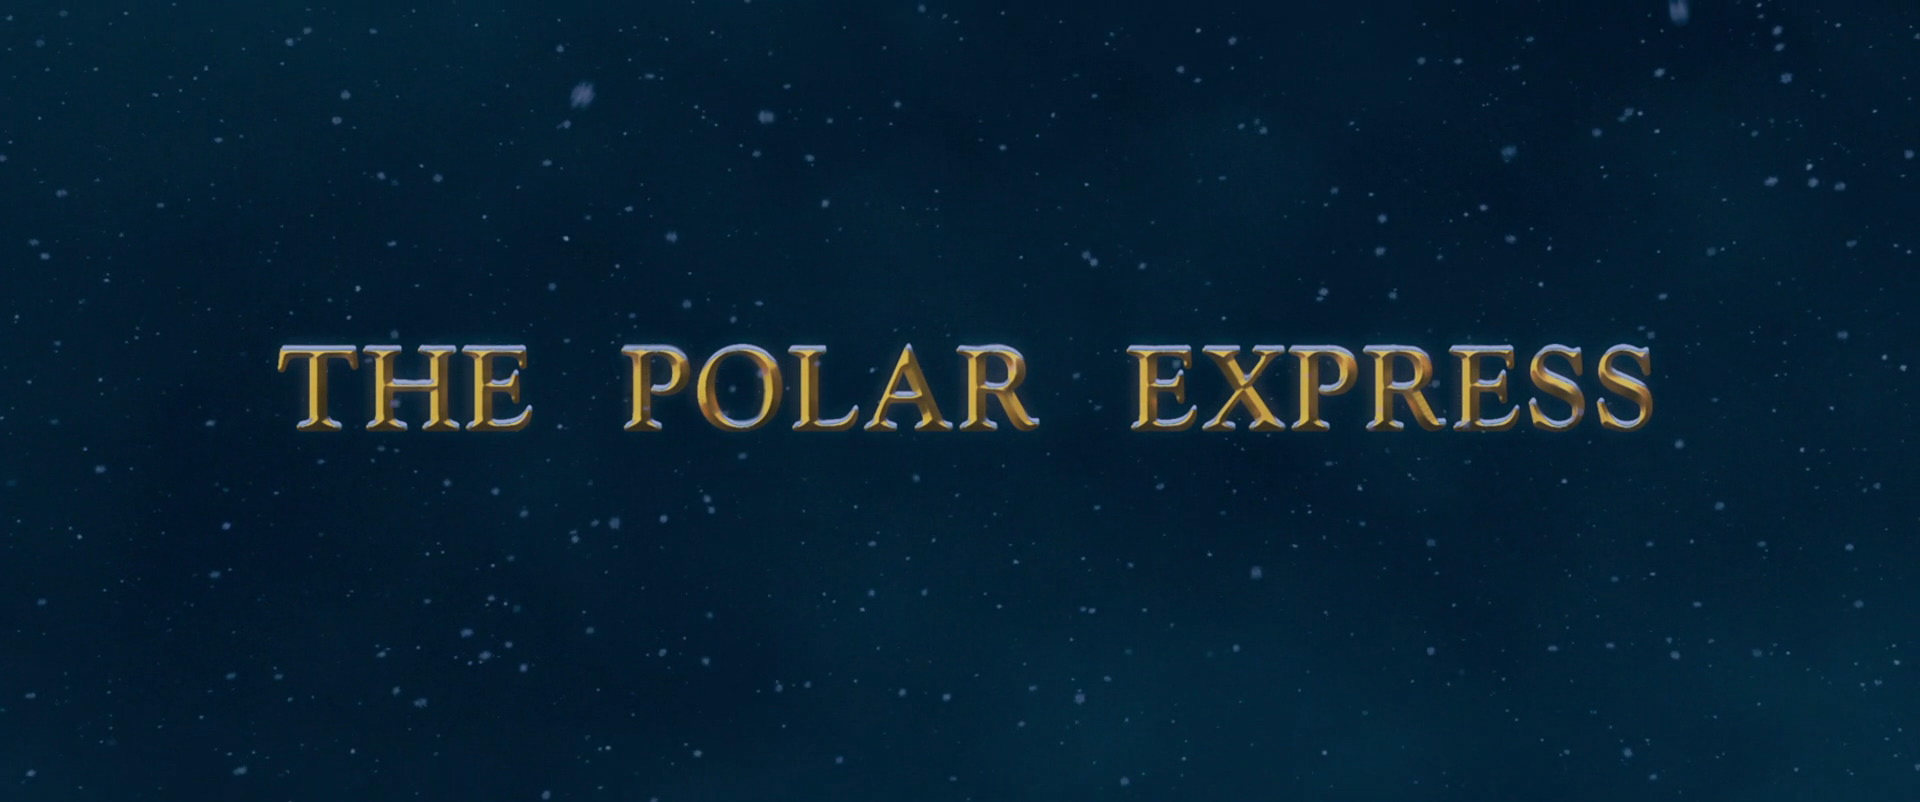 HQ The Polar Express Wallpapers | File 155.9Kb